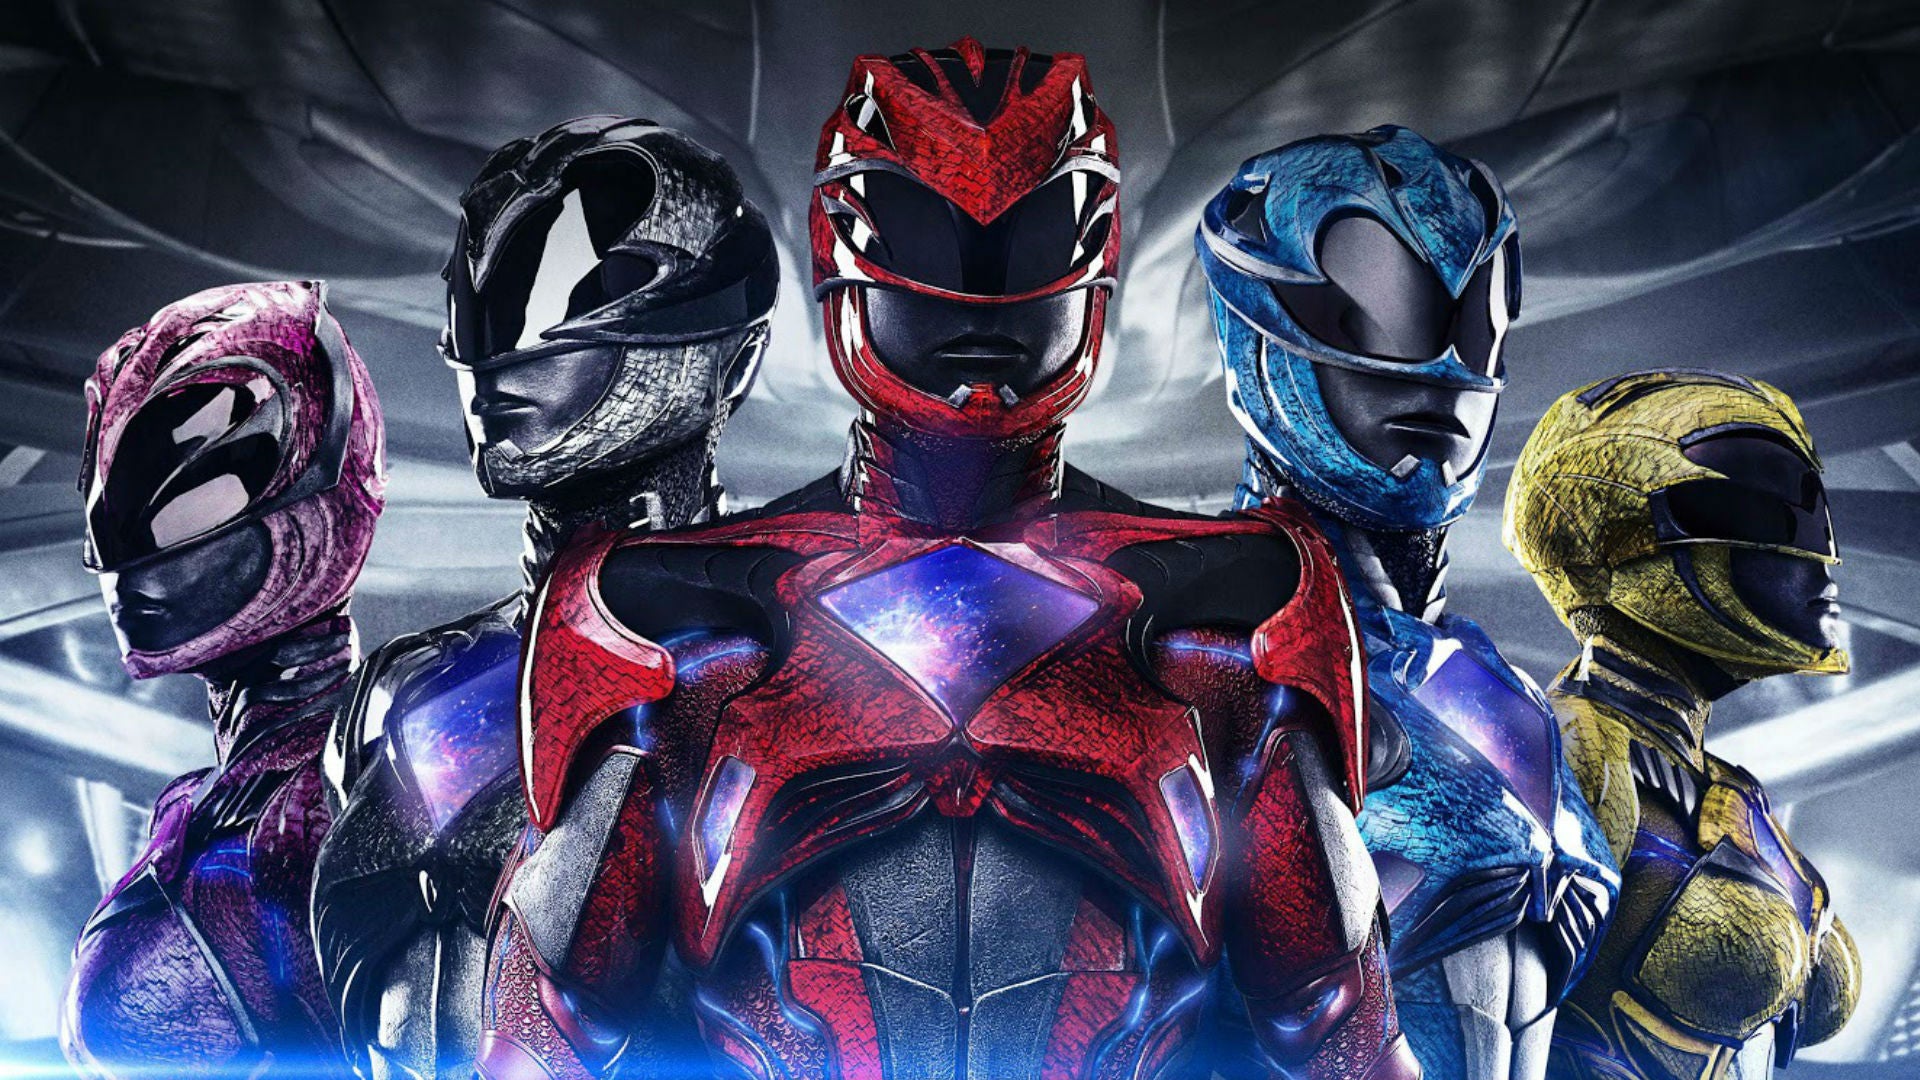 Power Rangers Movie Sequel in the Works